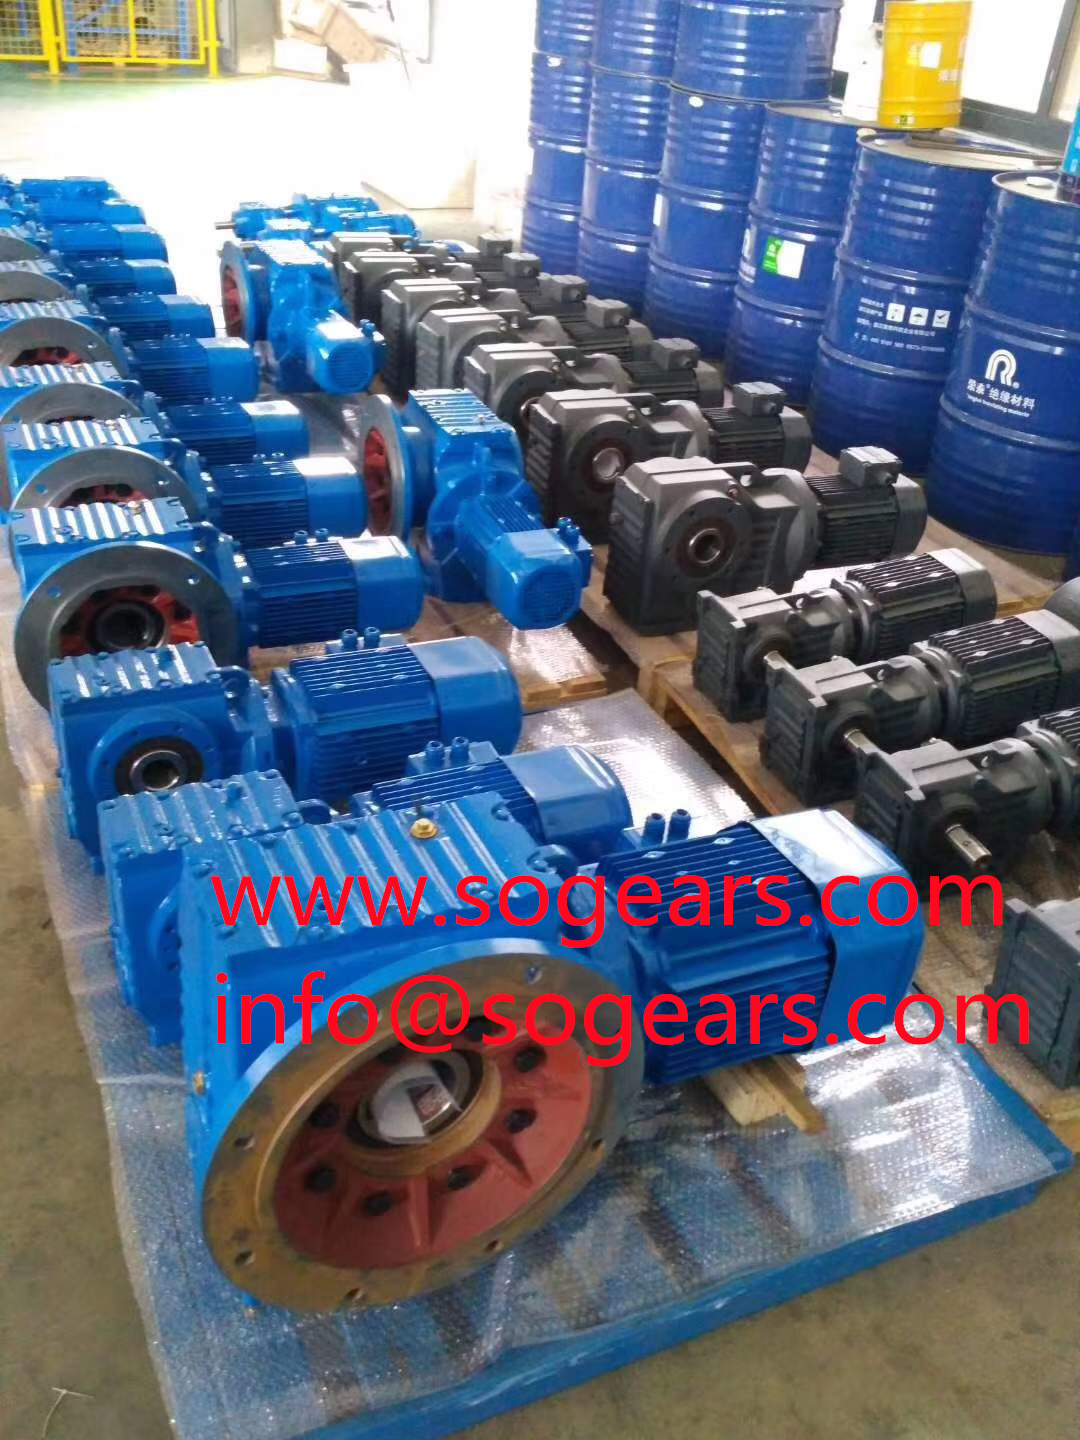 15kw sew gears bldc motor manufacturers